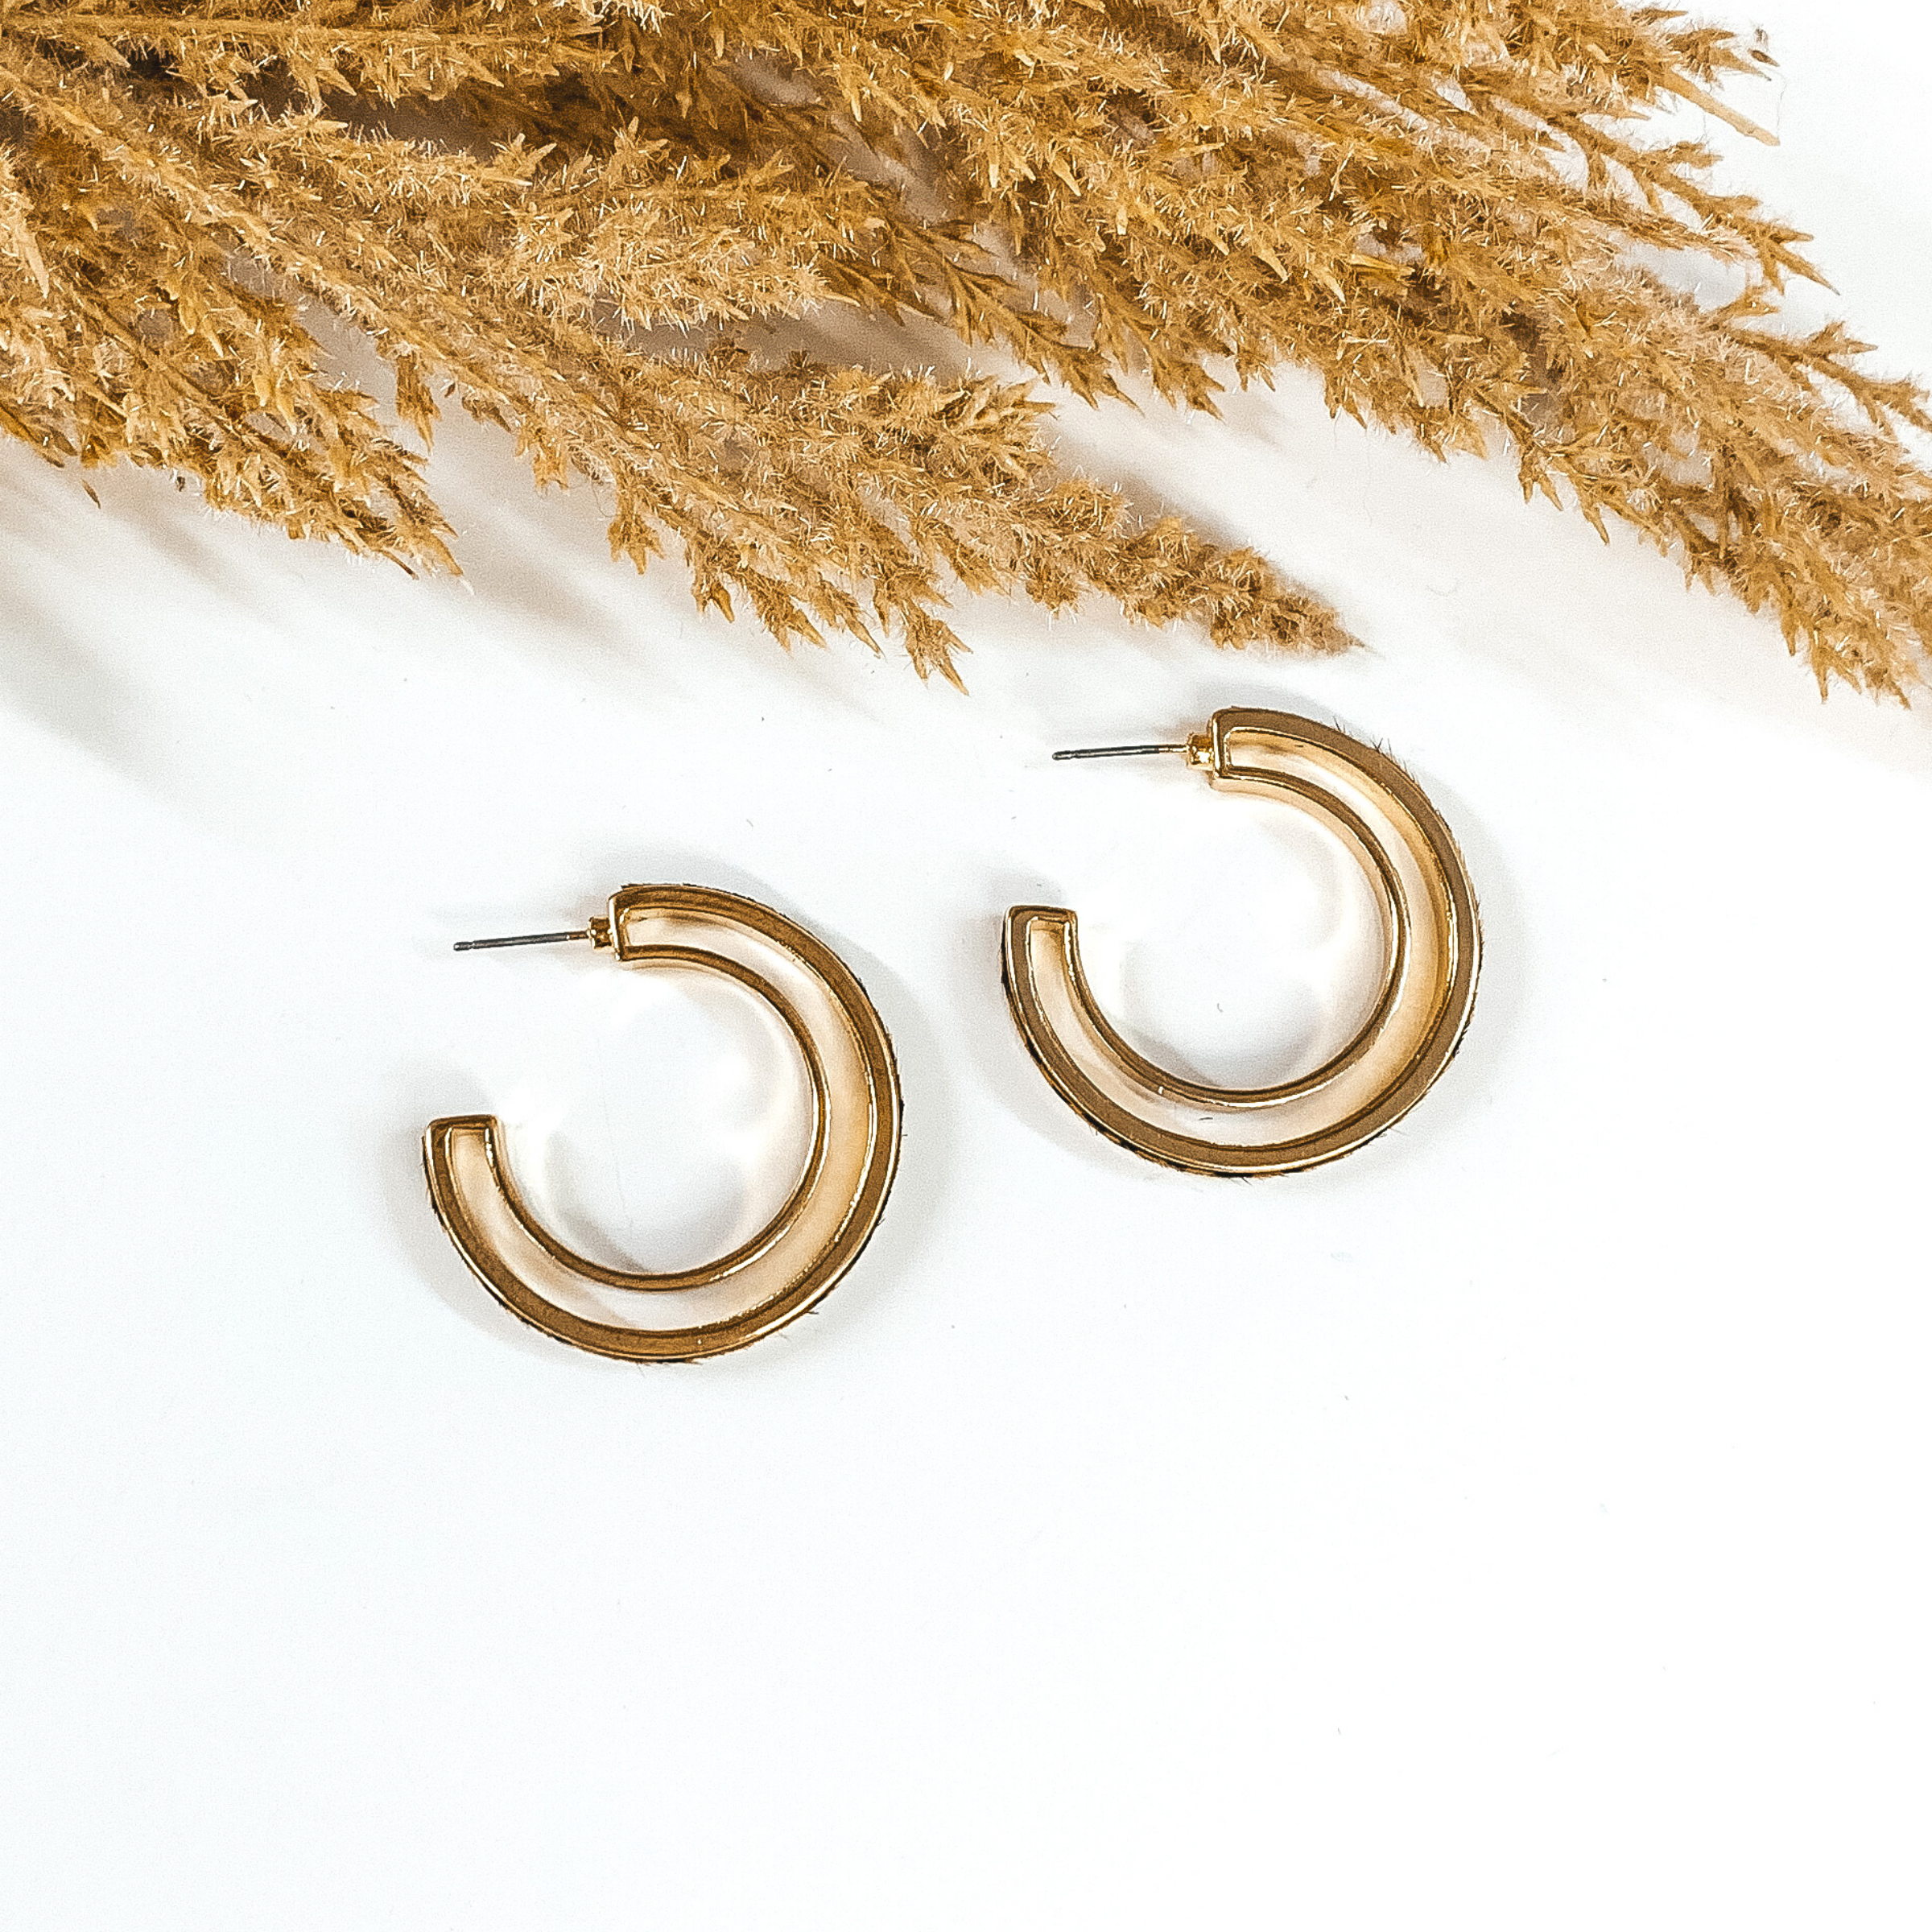 Gold Double Circle Hoop Earrings with Brown Dotted Print Inlay - Giddy Up Glamour Boutique